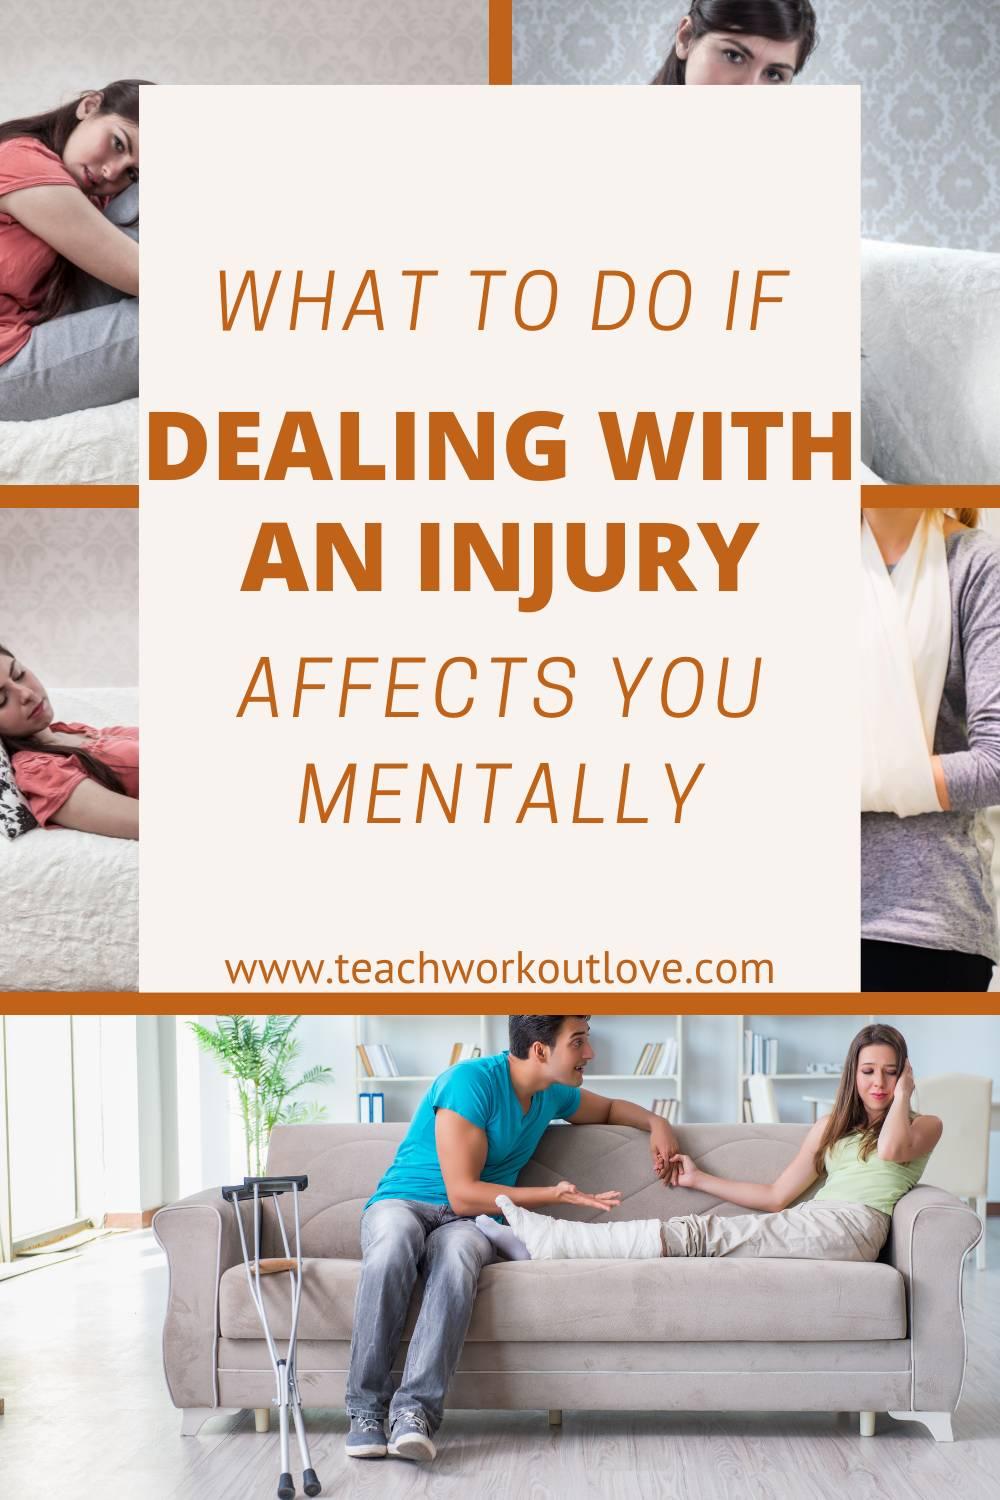 Have you been injured recently? Here are some suggestions for dealing with an injury both mentally and physically.